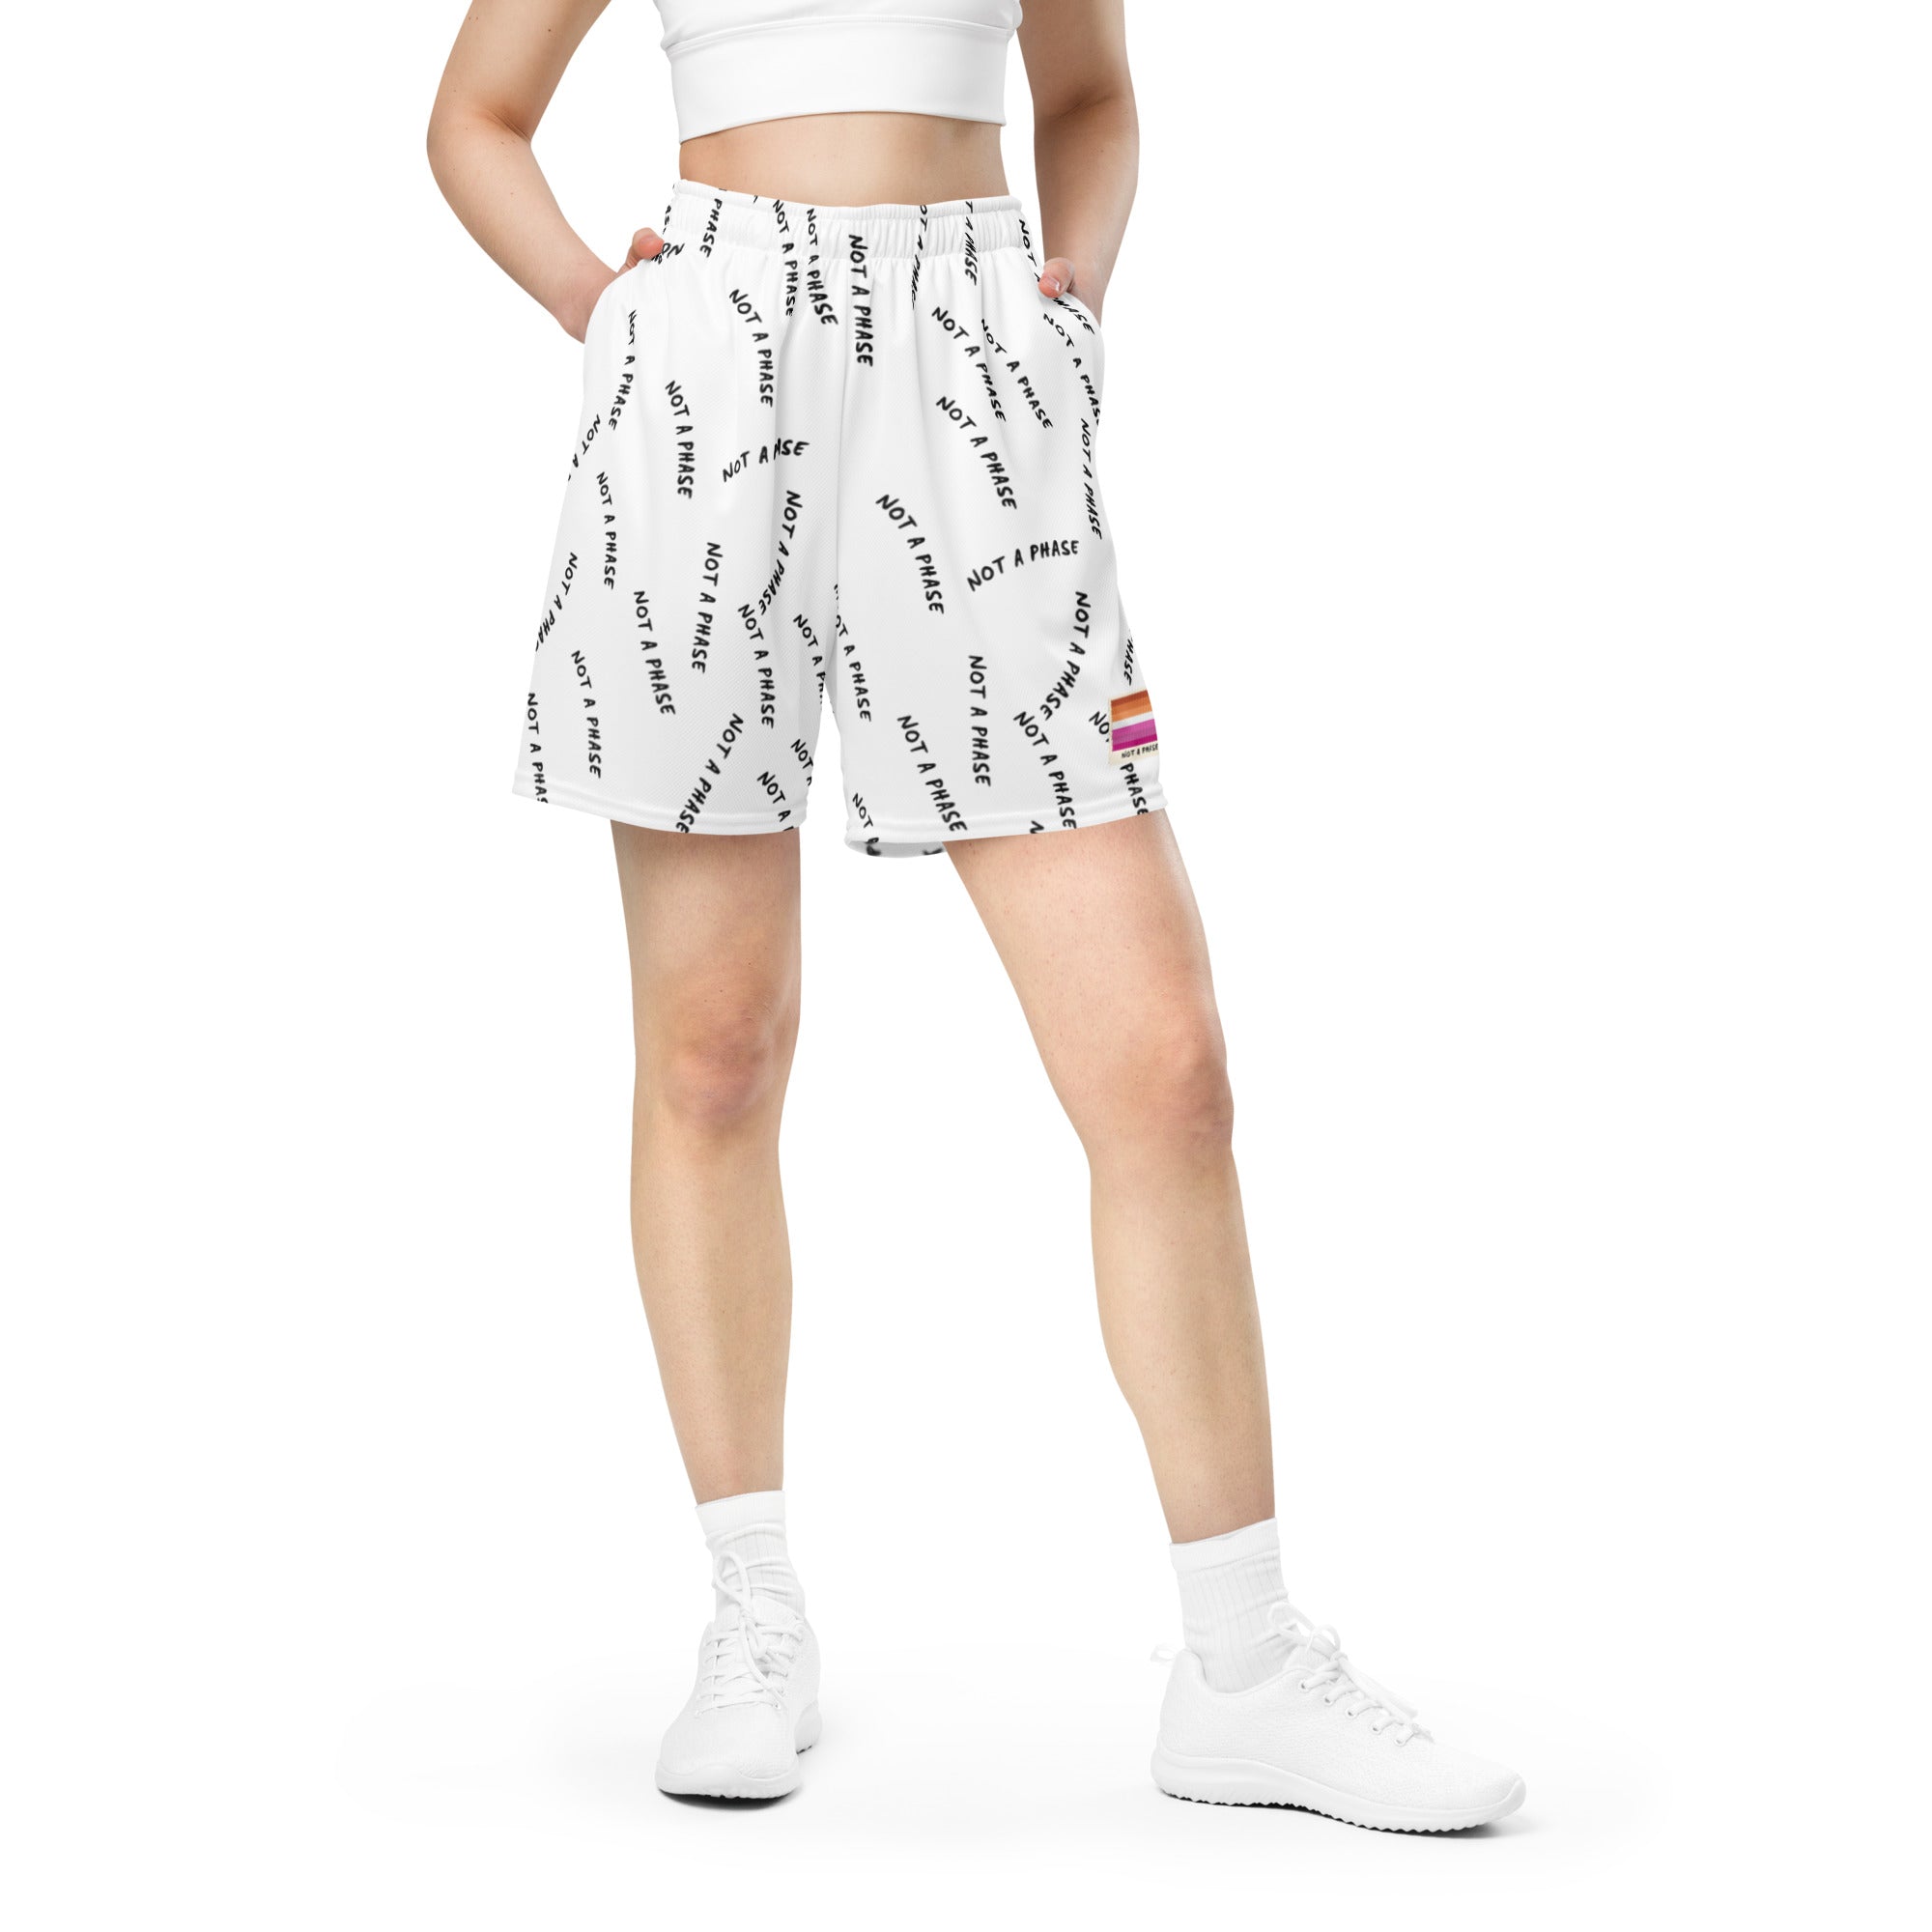 Not a Phase Lesbian WLW Pride mesh shorts - Rose Gold Co. Shop